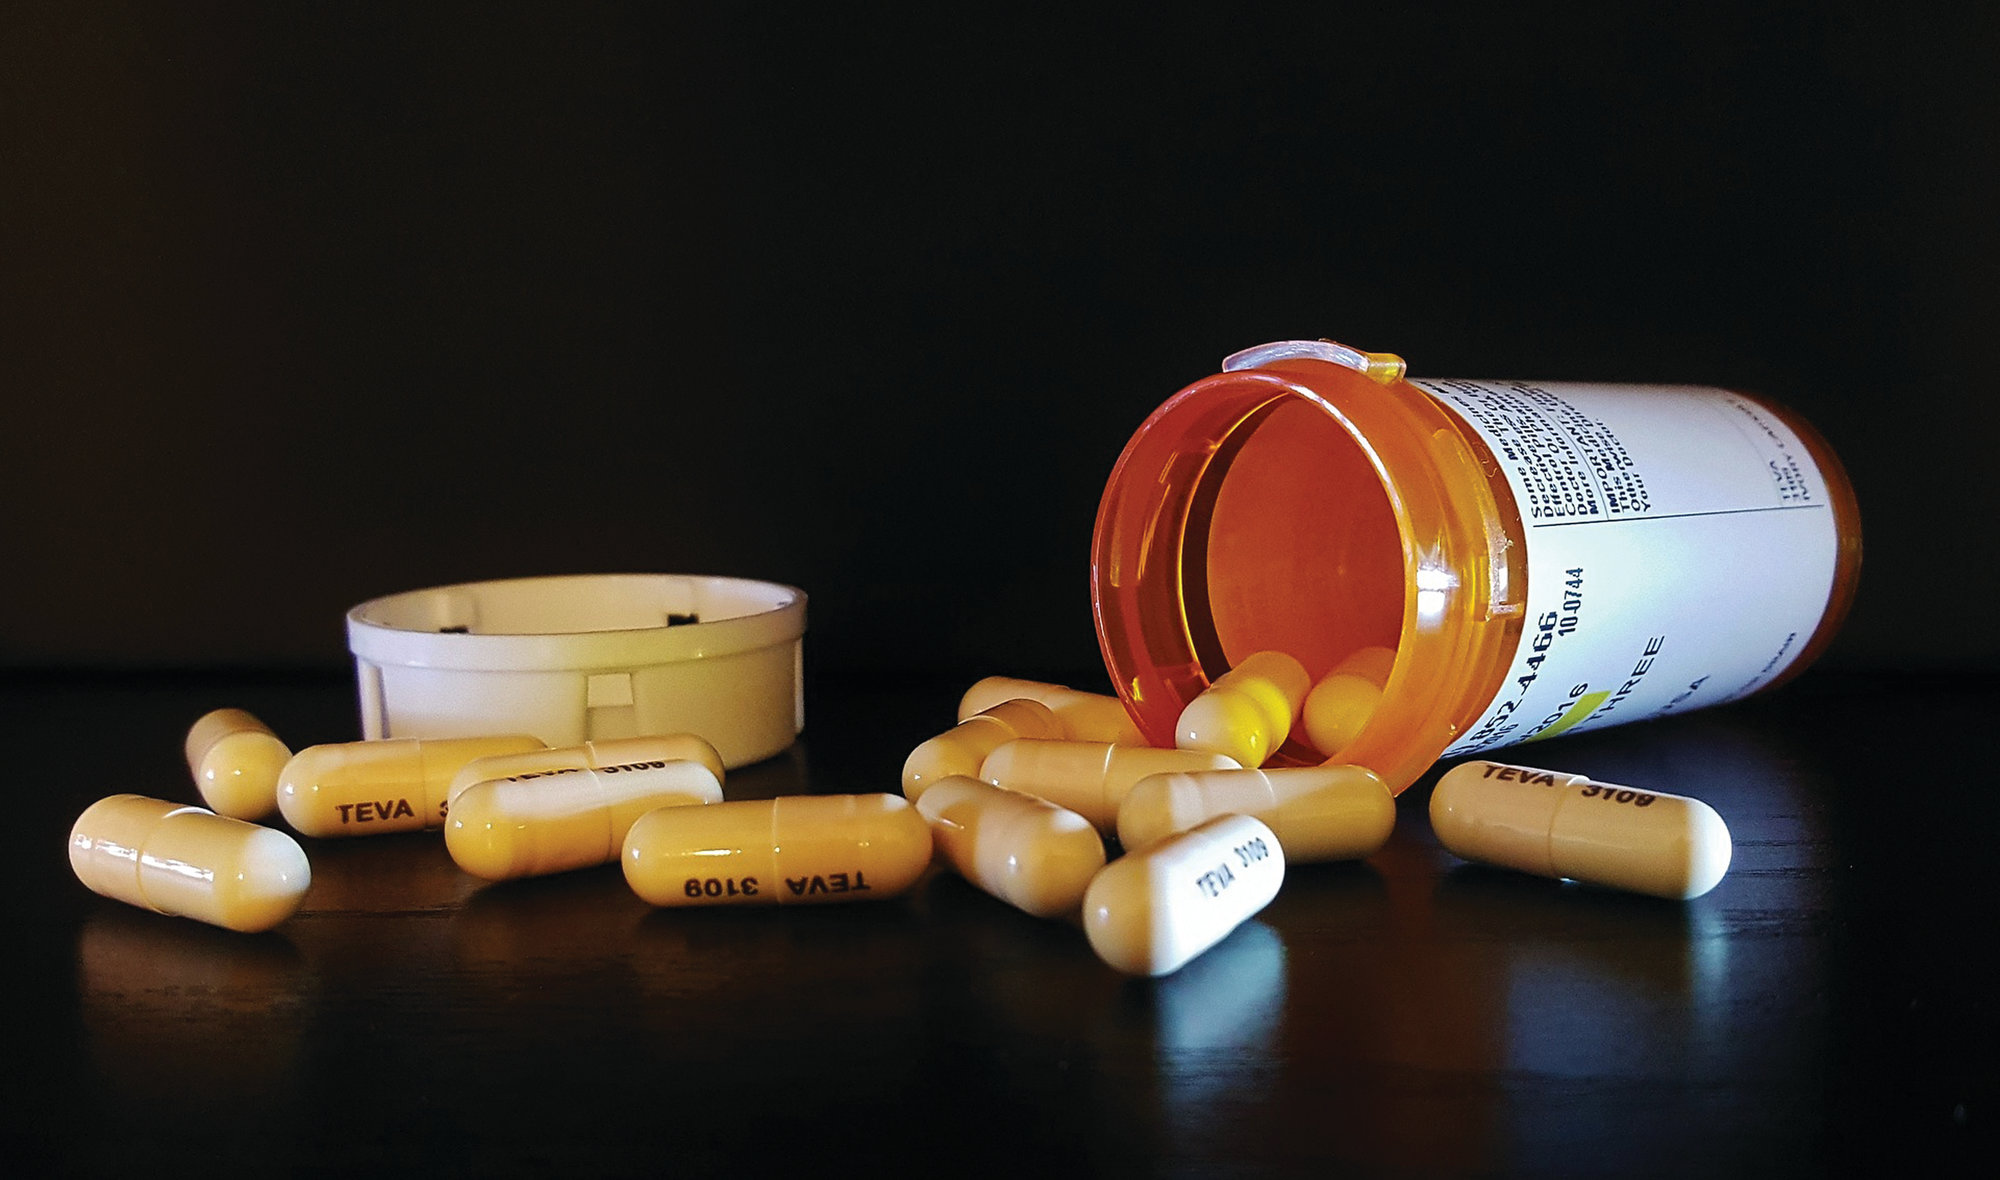 Safely dispose of medications with Sumter law enforcement - The Sumter Item